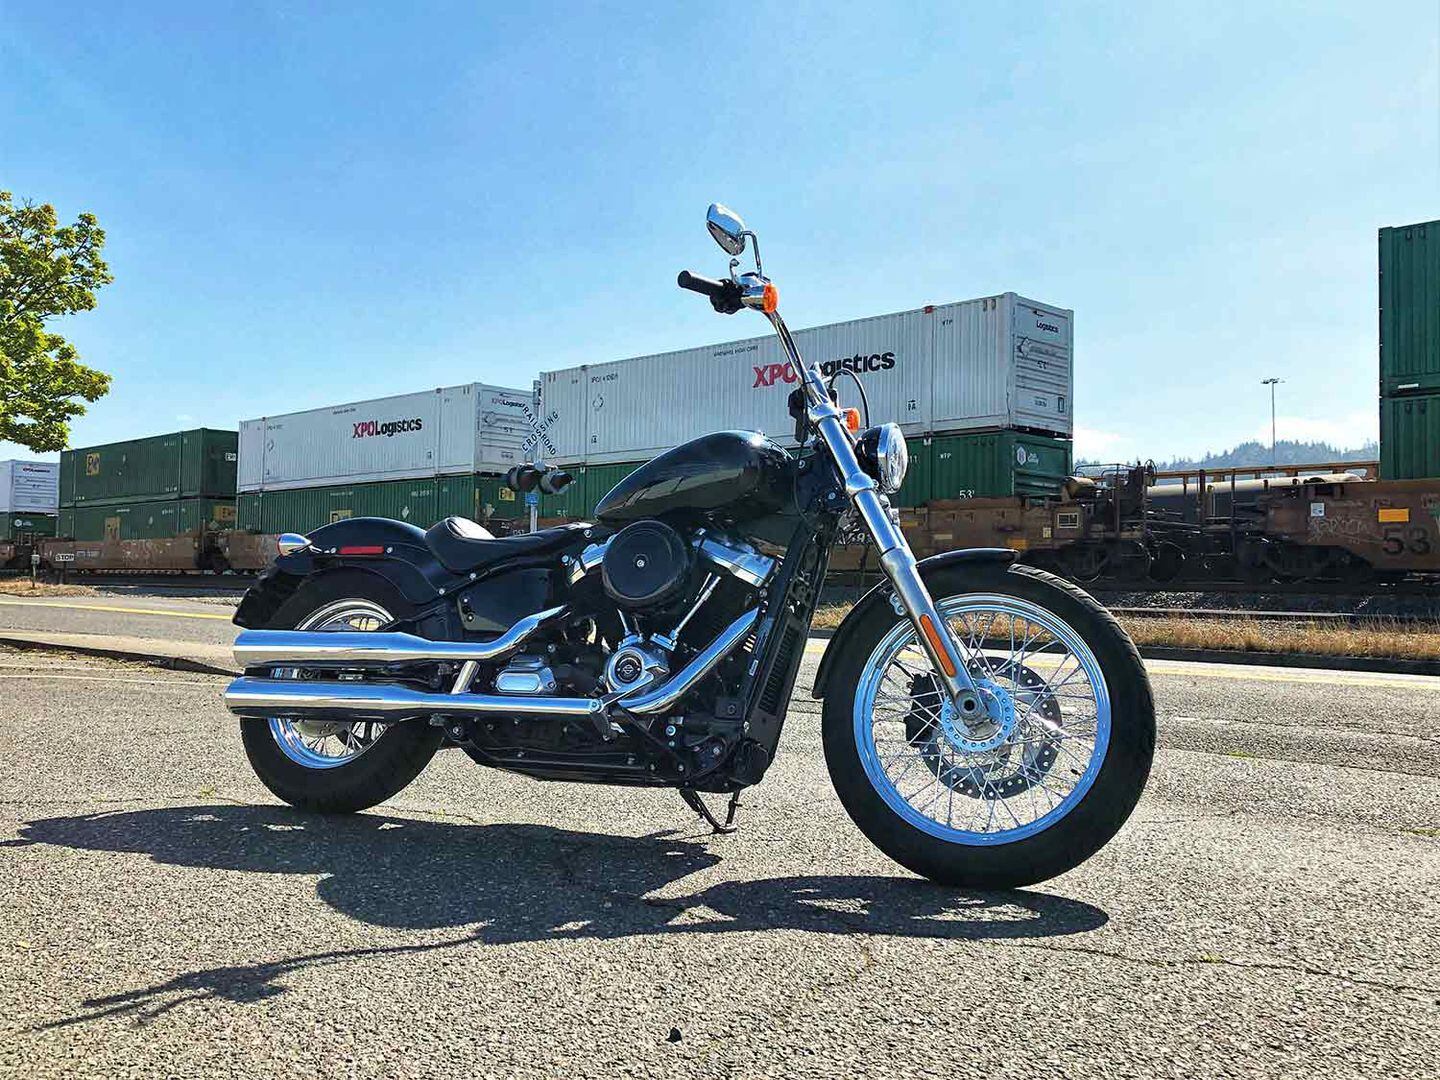 2020 Harley-Softail Standard Review